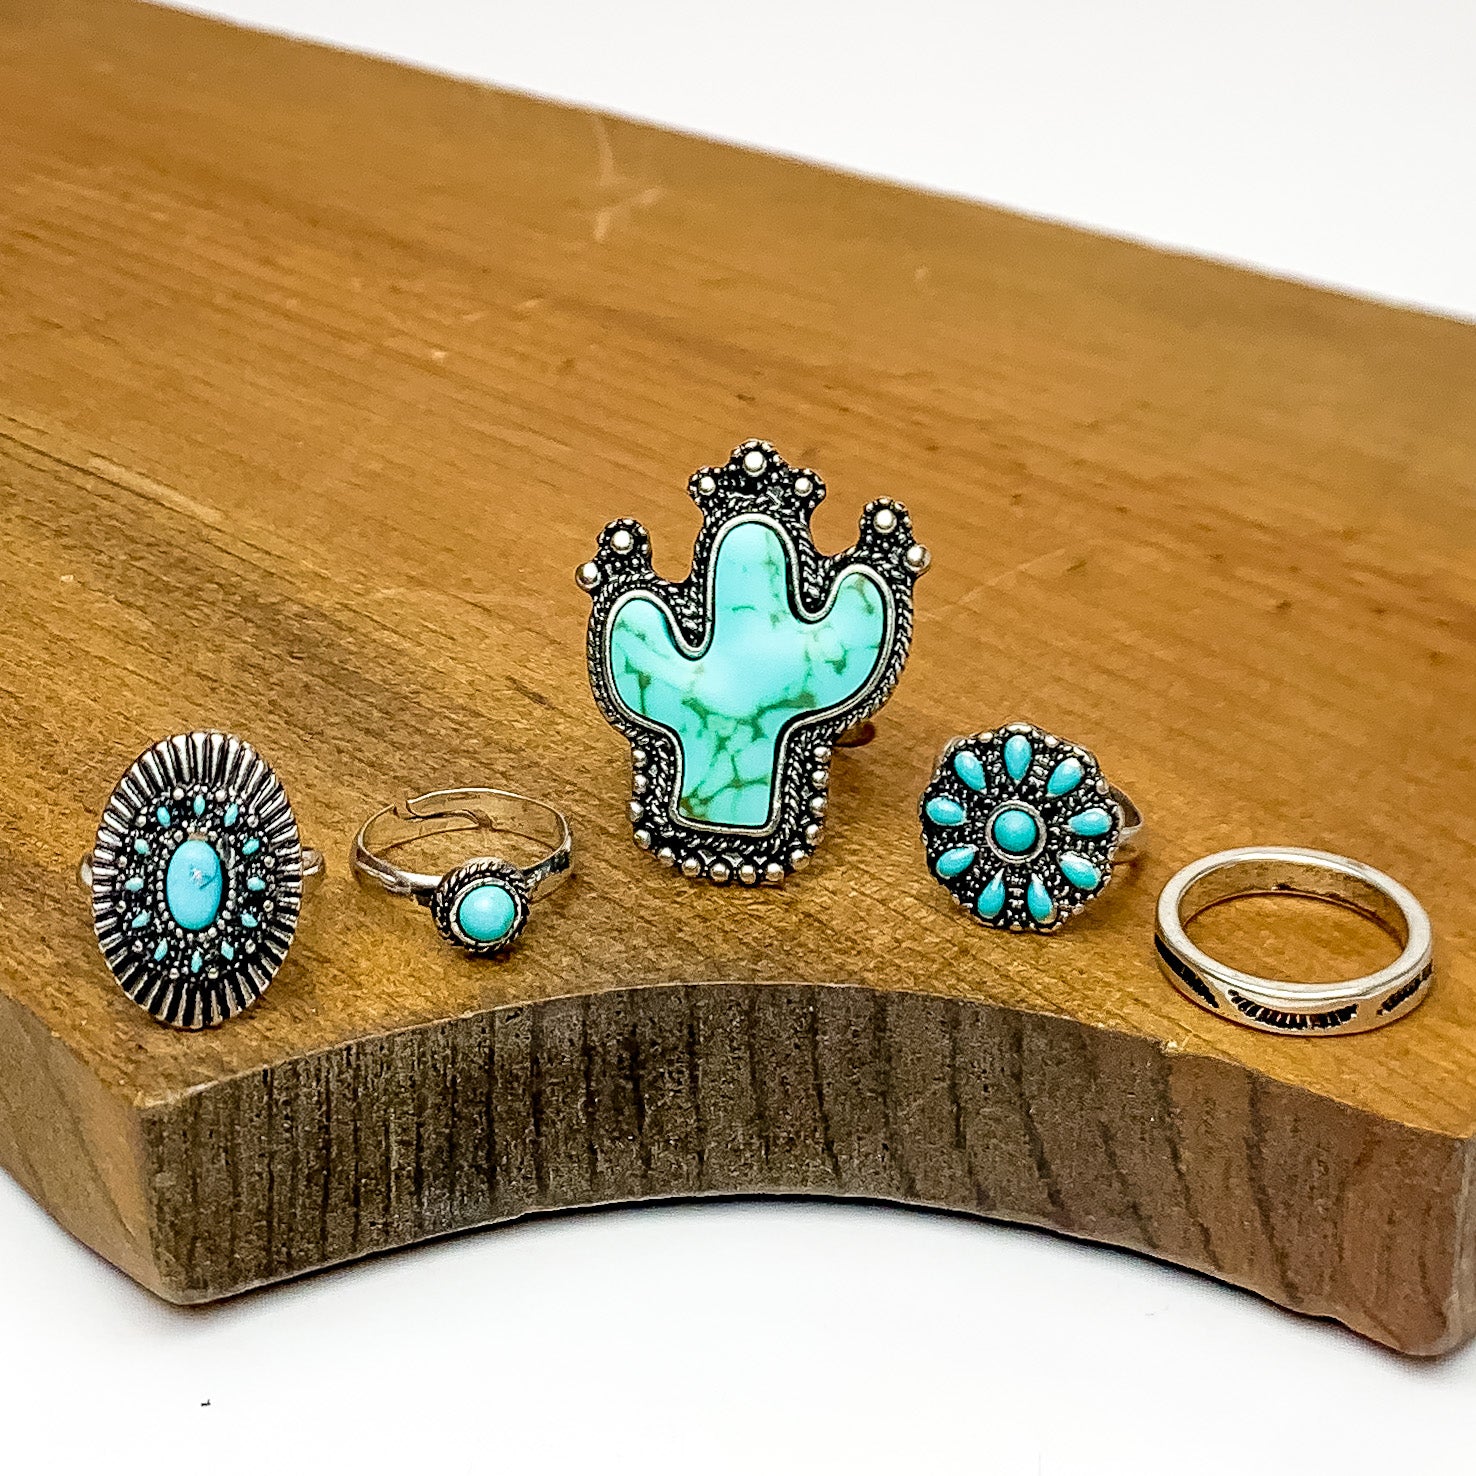 Set of 5 | Western Silver Tone Ring Set With Turquoise Stones. Pictured on a white background with the rings on a piece of wood.